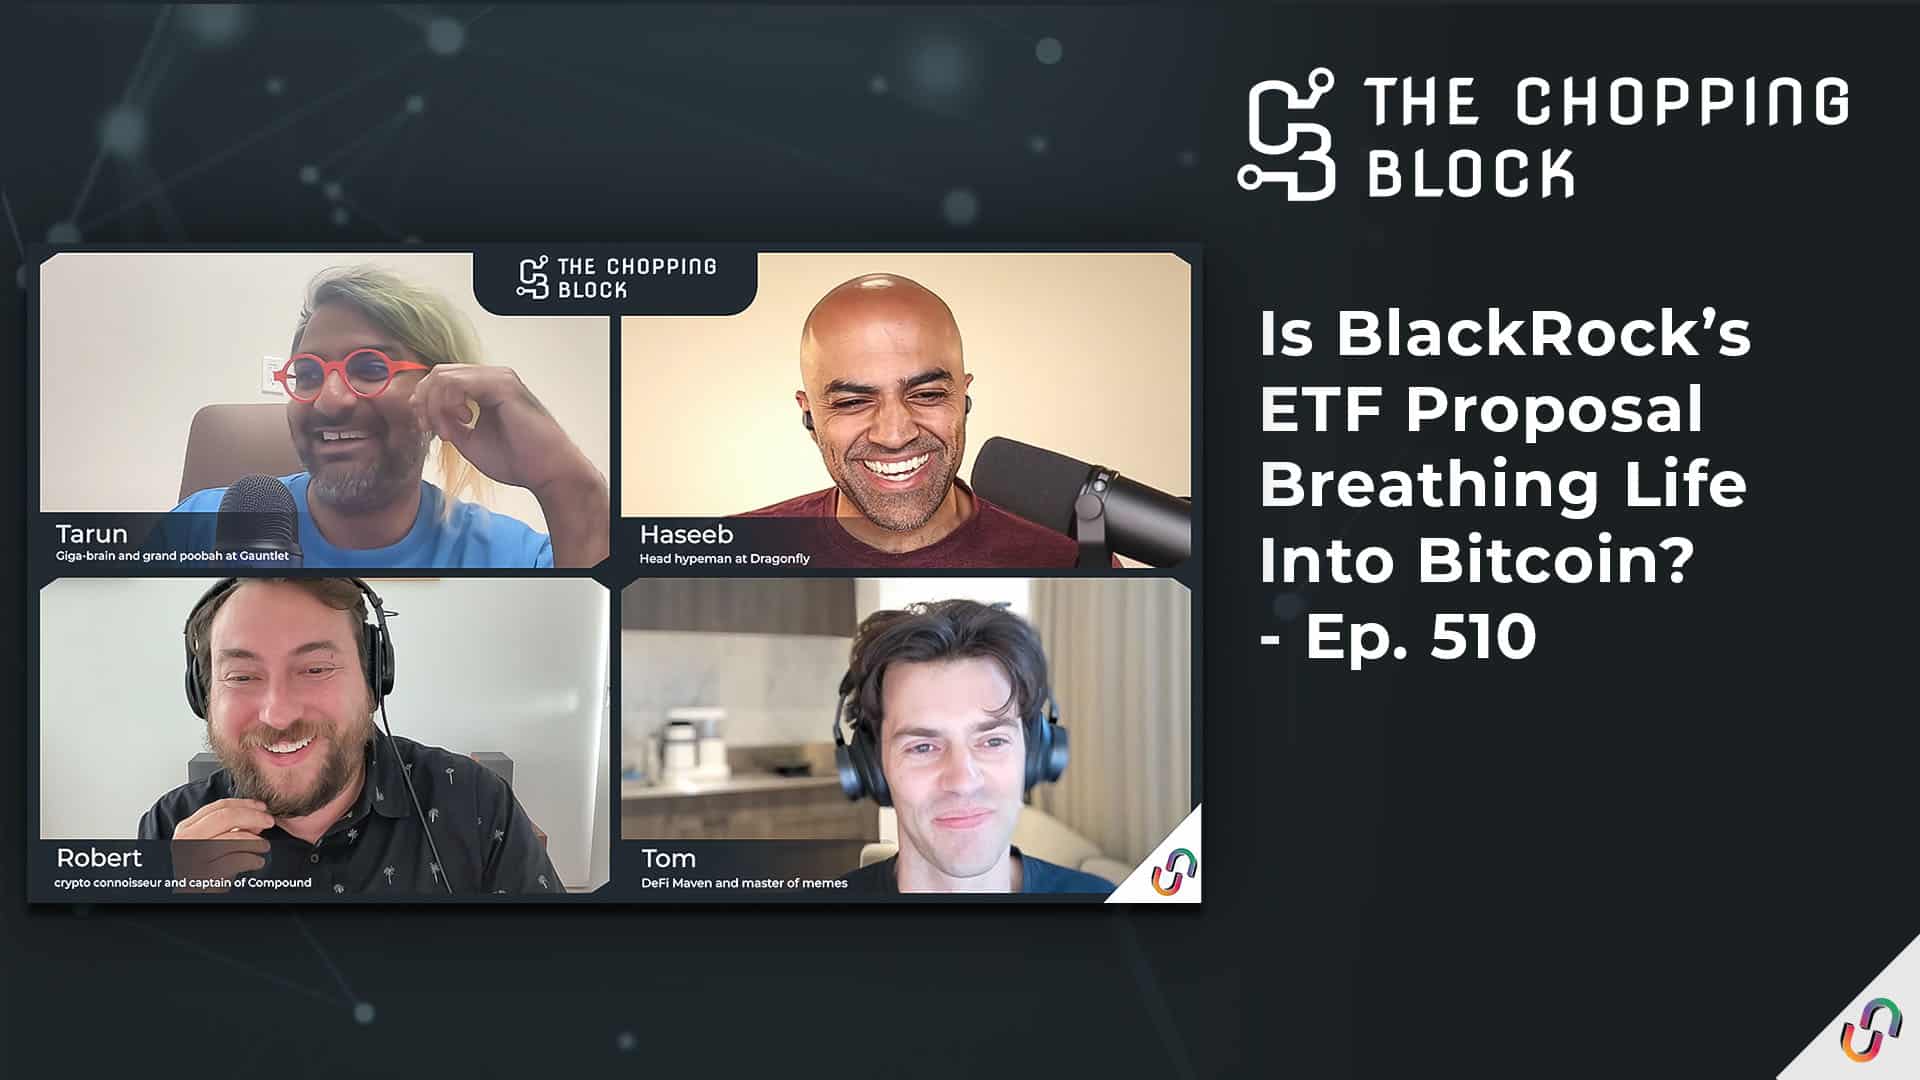 The Chopping Block: Is BlackRock’s ETF Proposal Breathing Life Into Bitcoin? - Ep. 510